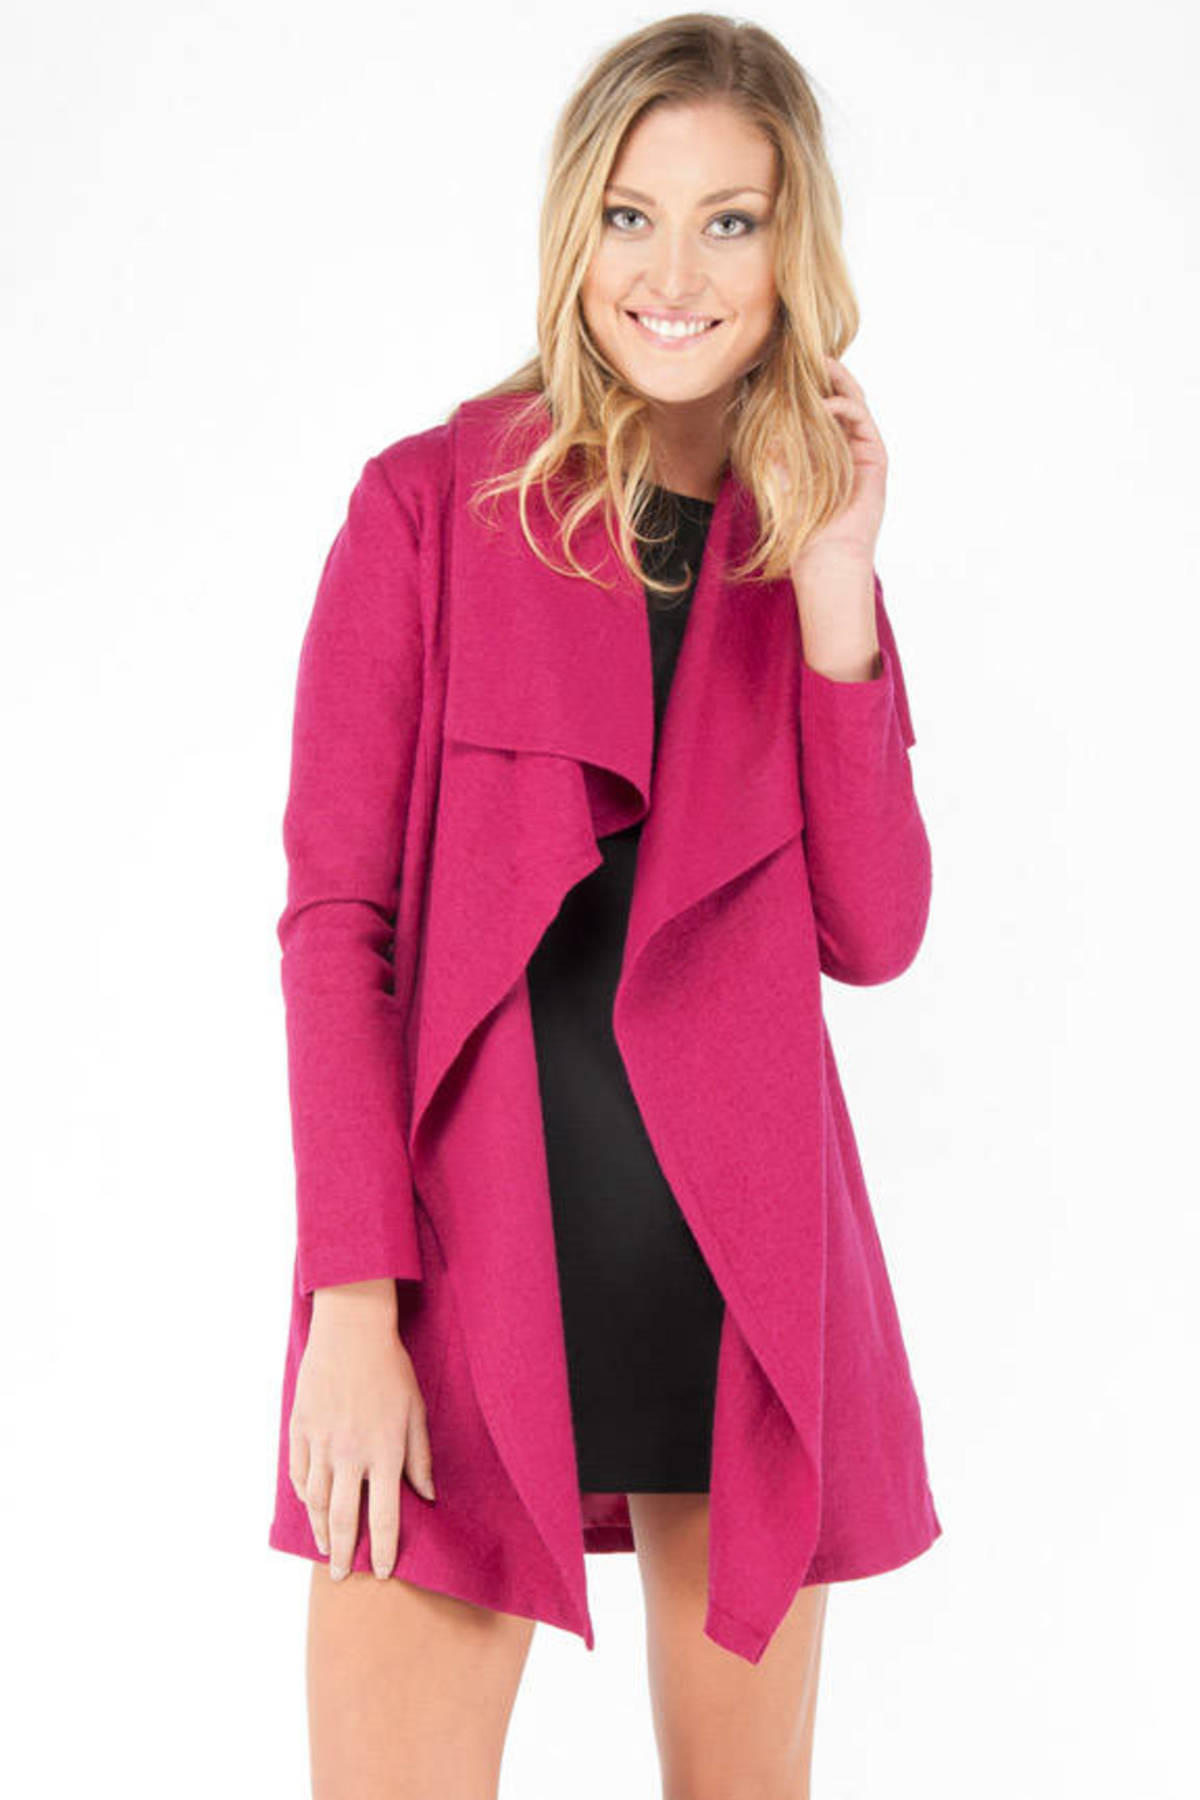 Open Collared Knitted Jacket in Magenta - $23 | Tobi US